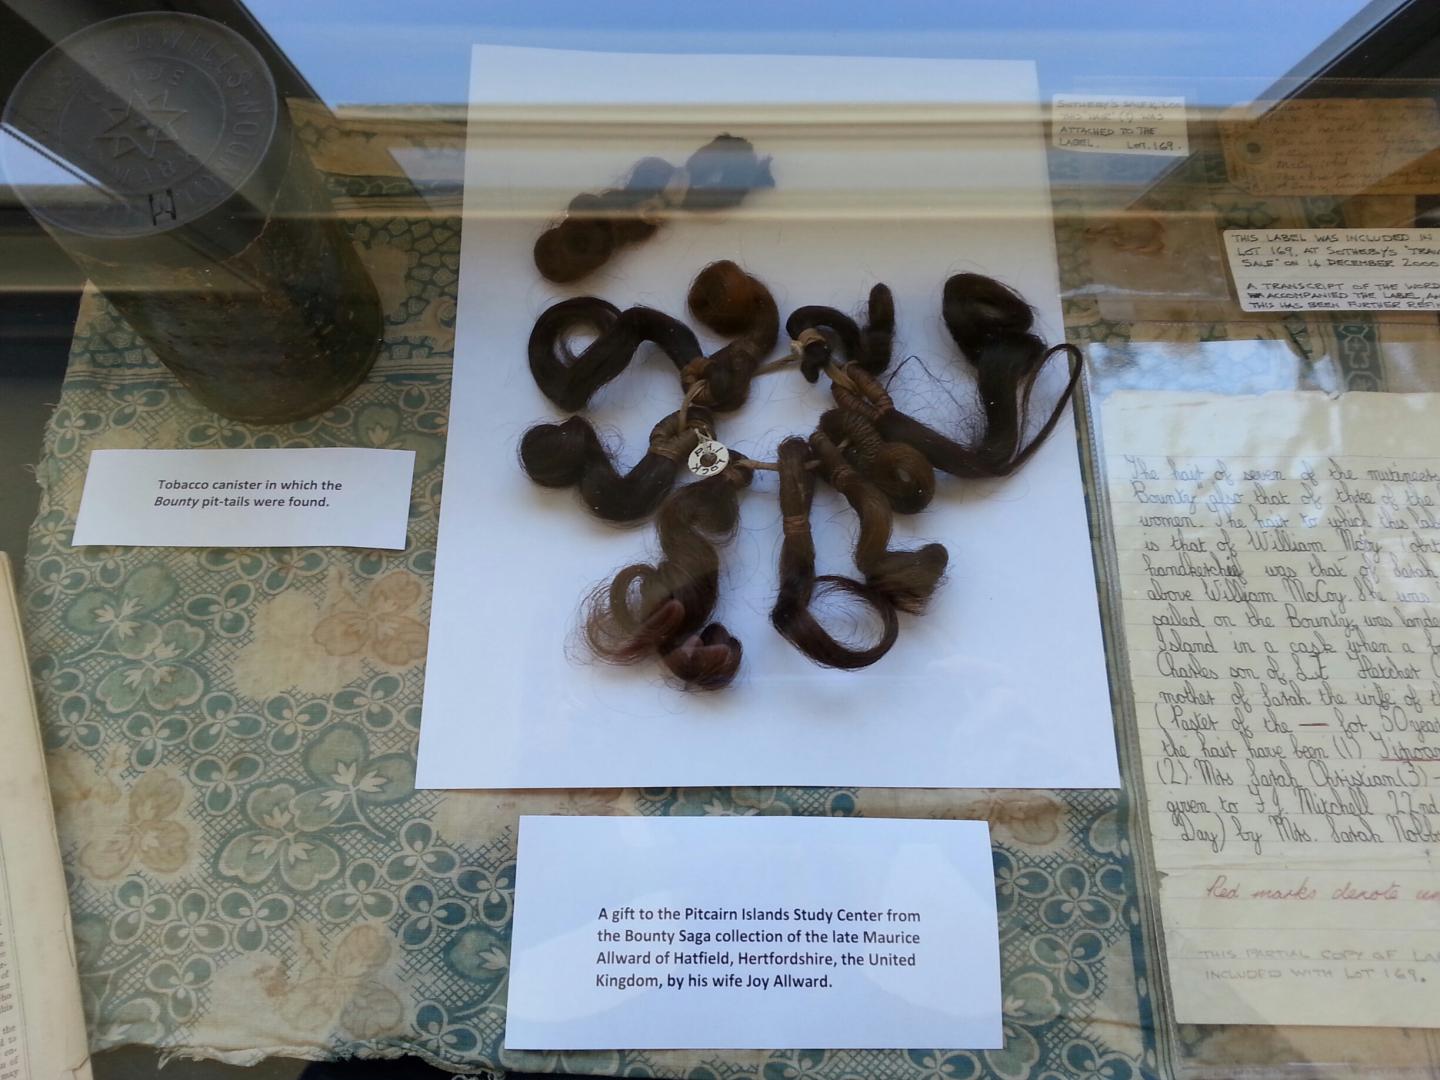 Pigtails on Display at the Pitcairn Islands Study Centre